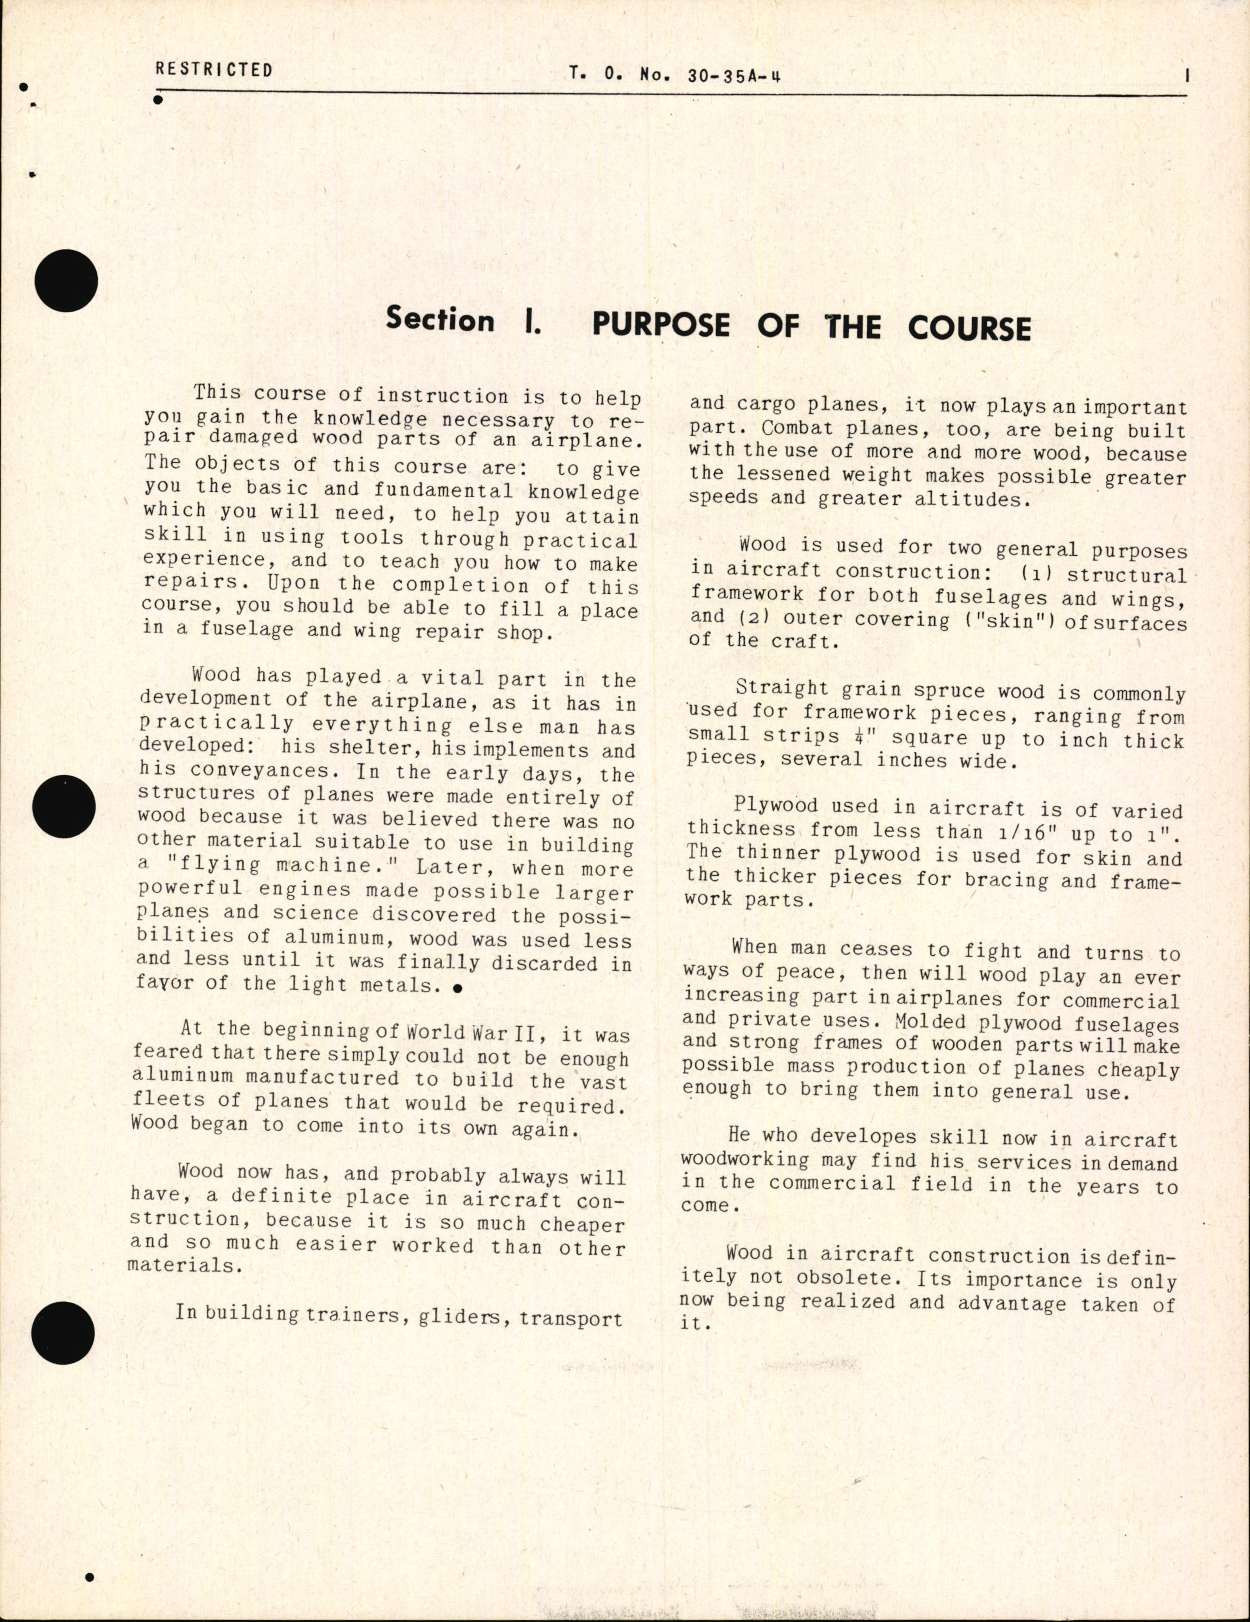 Sample page 5 from AirCorps Library document: Training Guide for Aircraft Woodworker